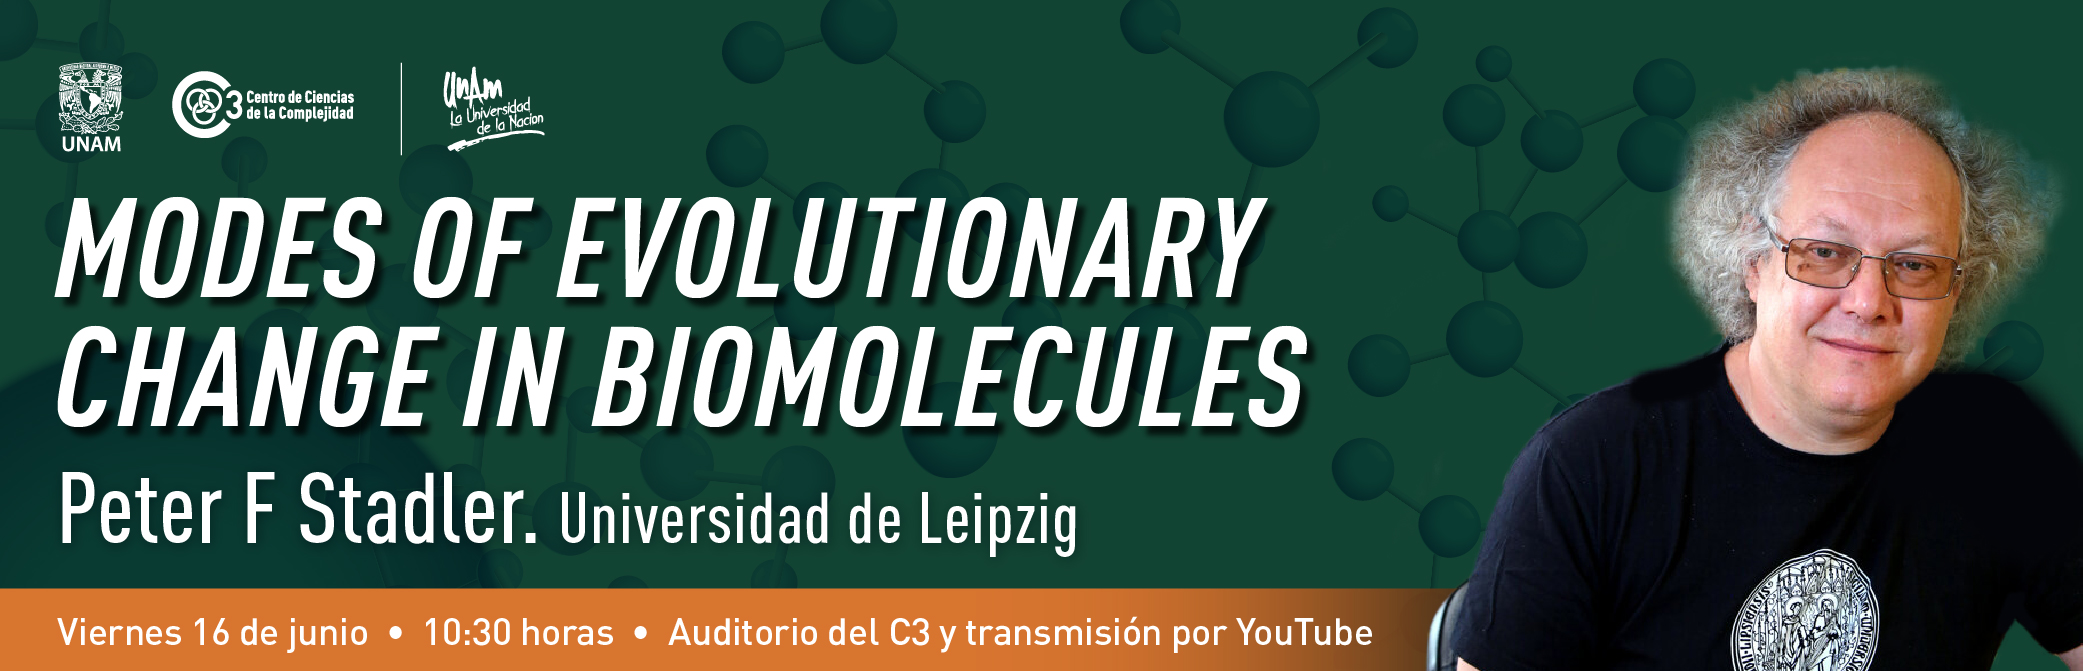 Modes of evolutionary change in Biomolecules